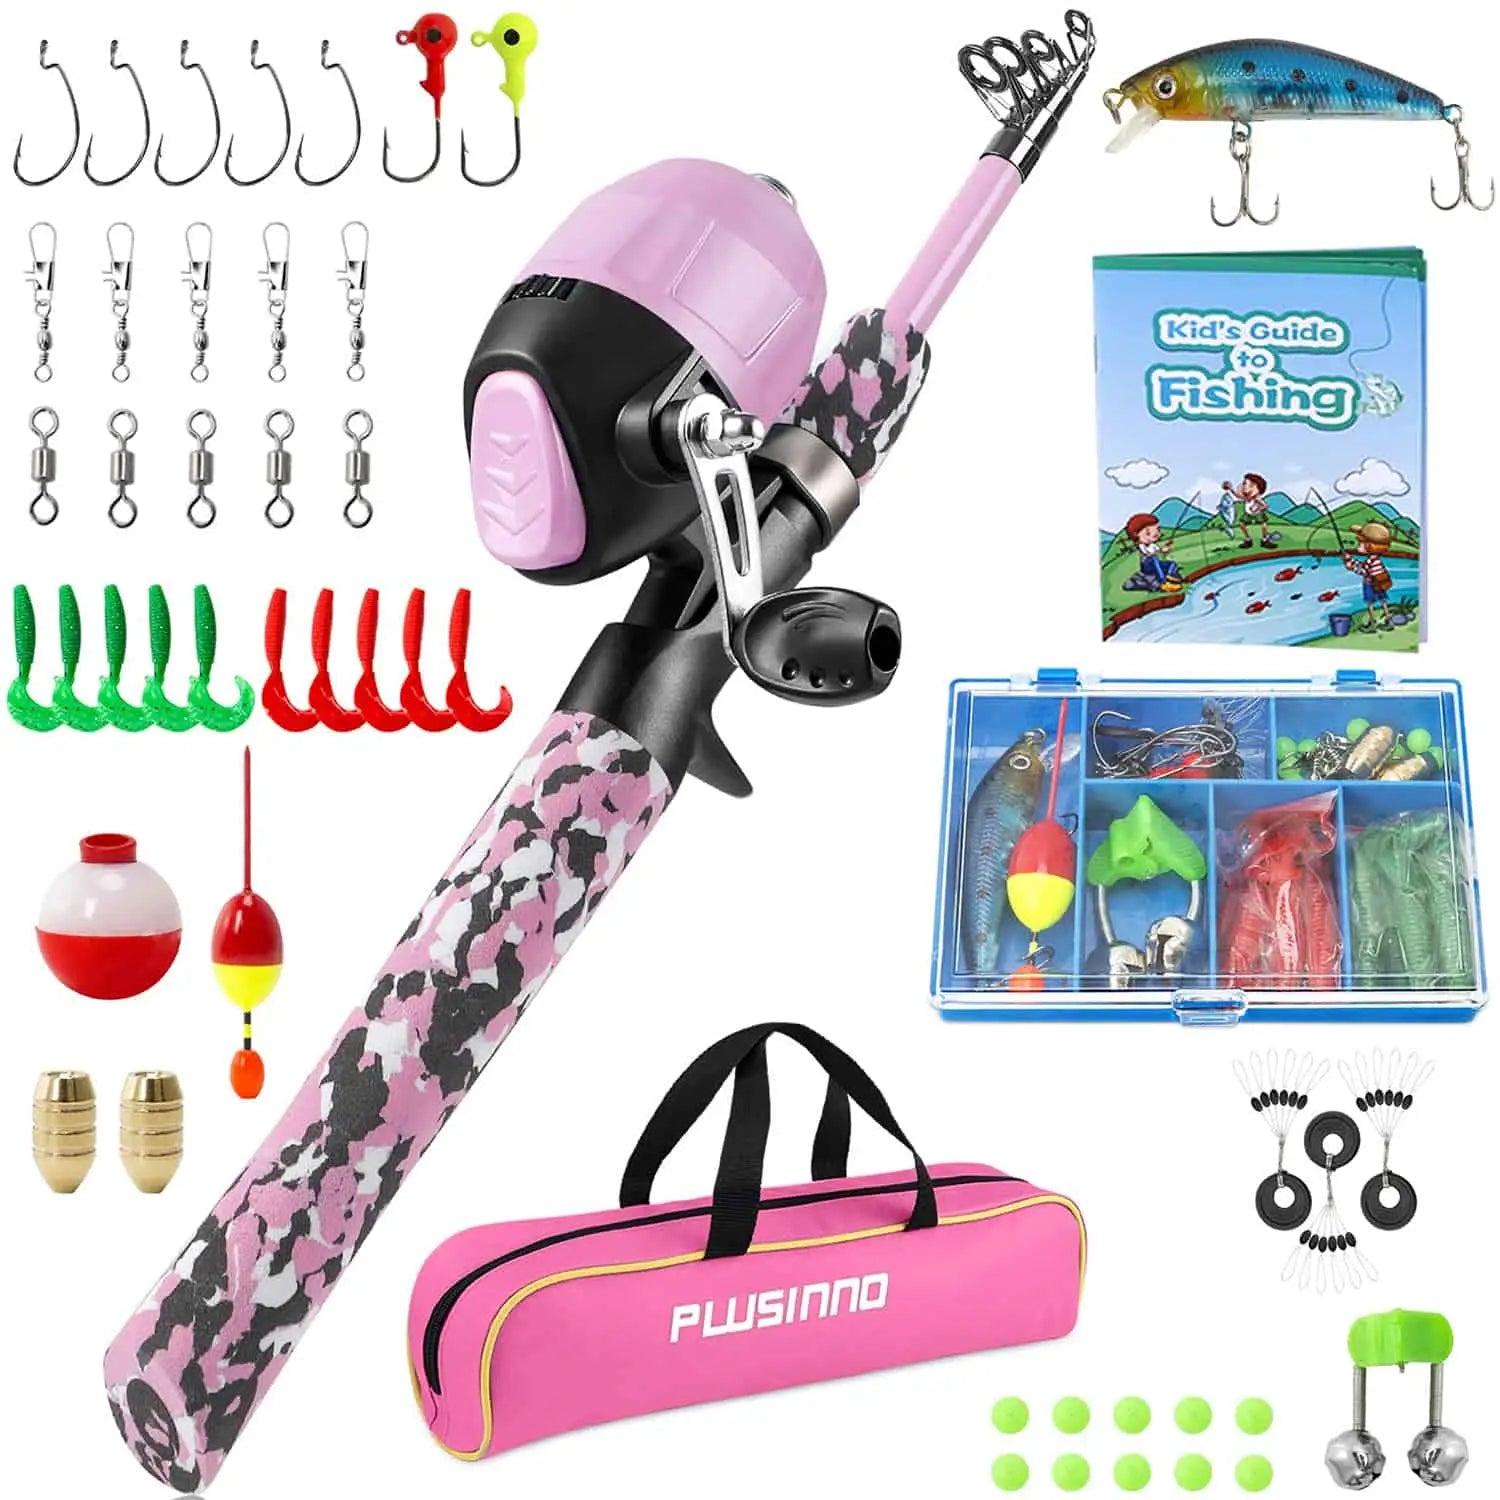 Proberos Kids Fishing Pole Set - All-in-one Telescopic Rod and Reel Combo  Kit with Tackle Box and Bag for Boys and Girls